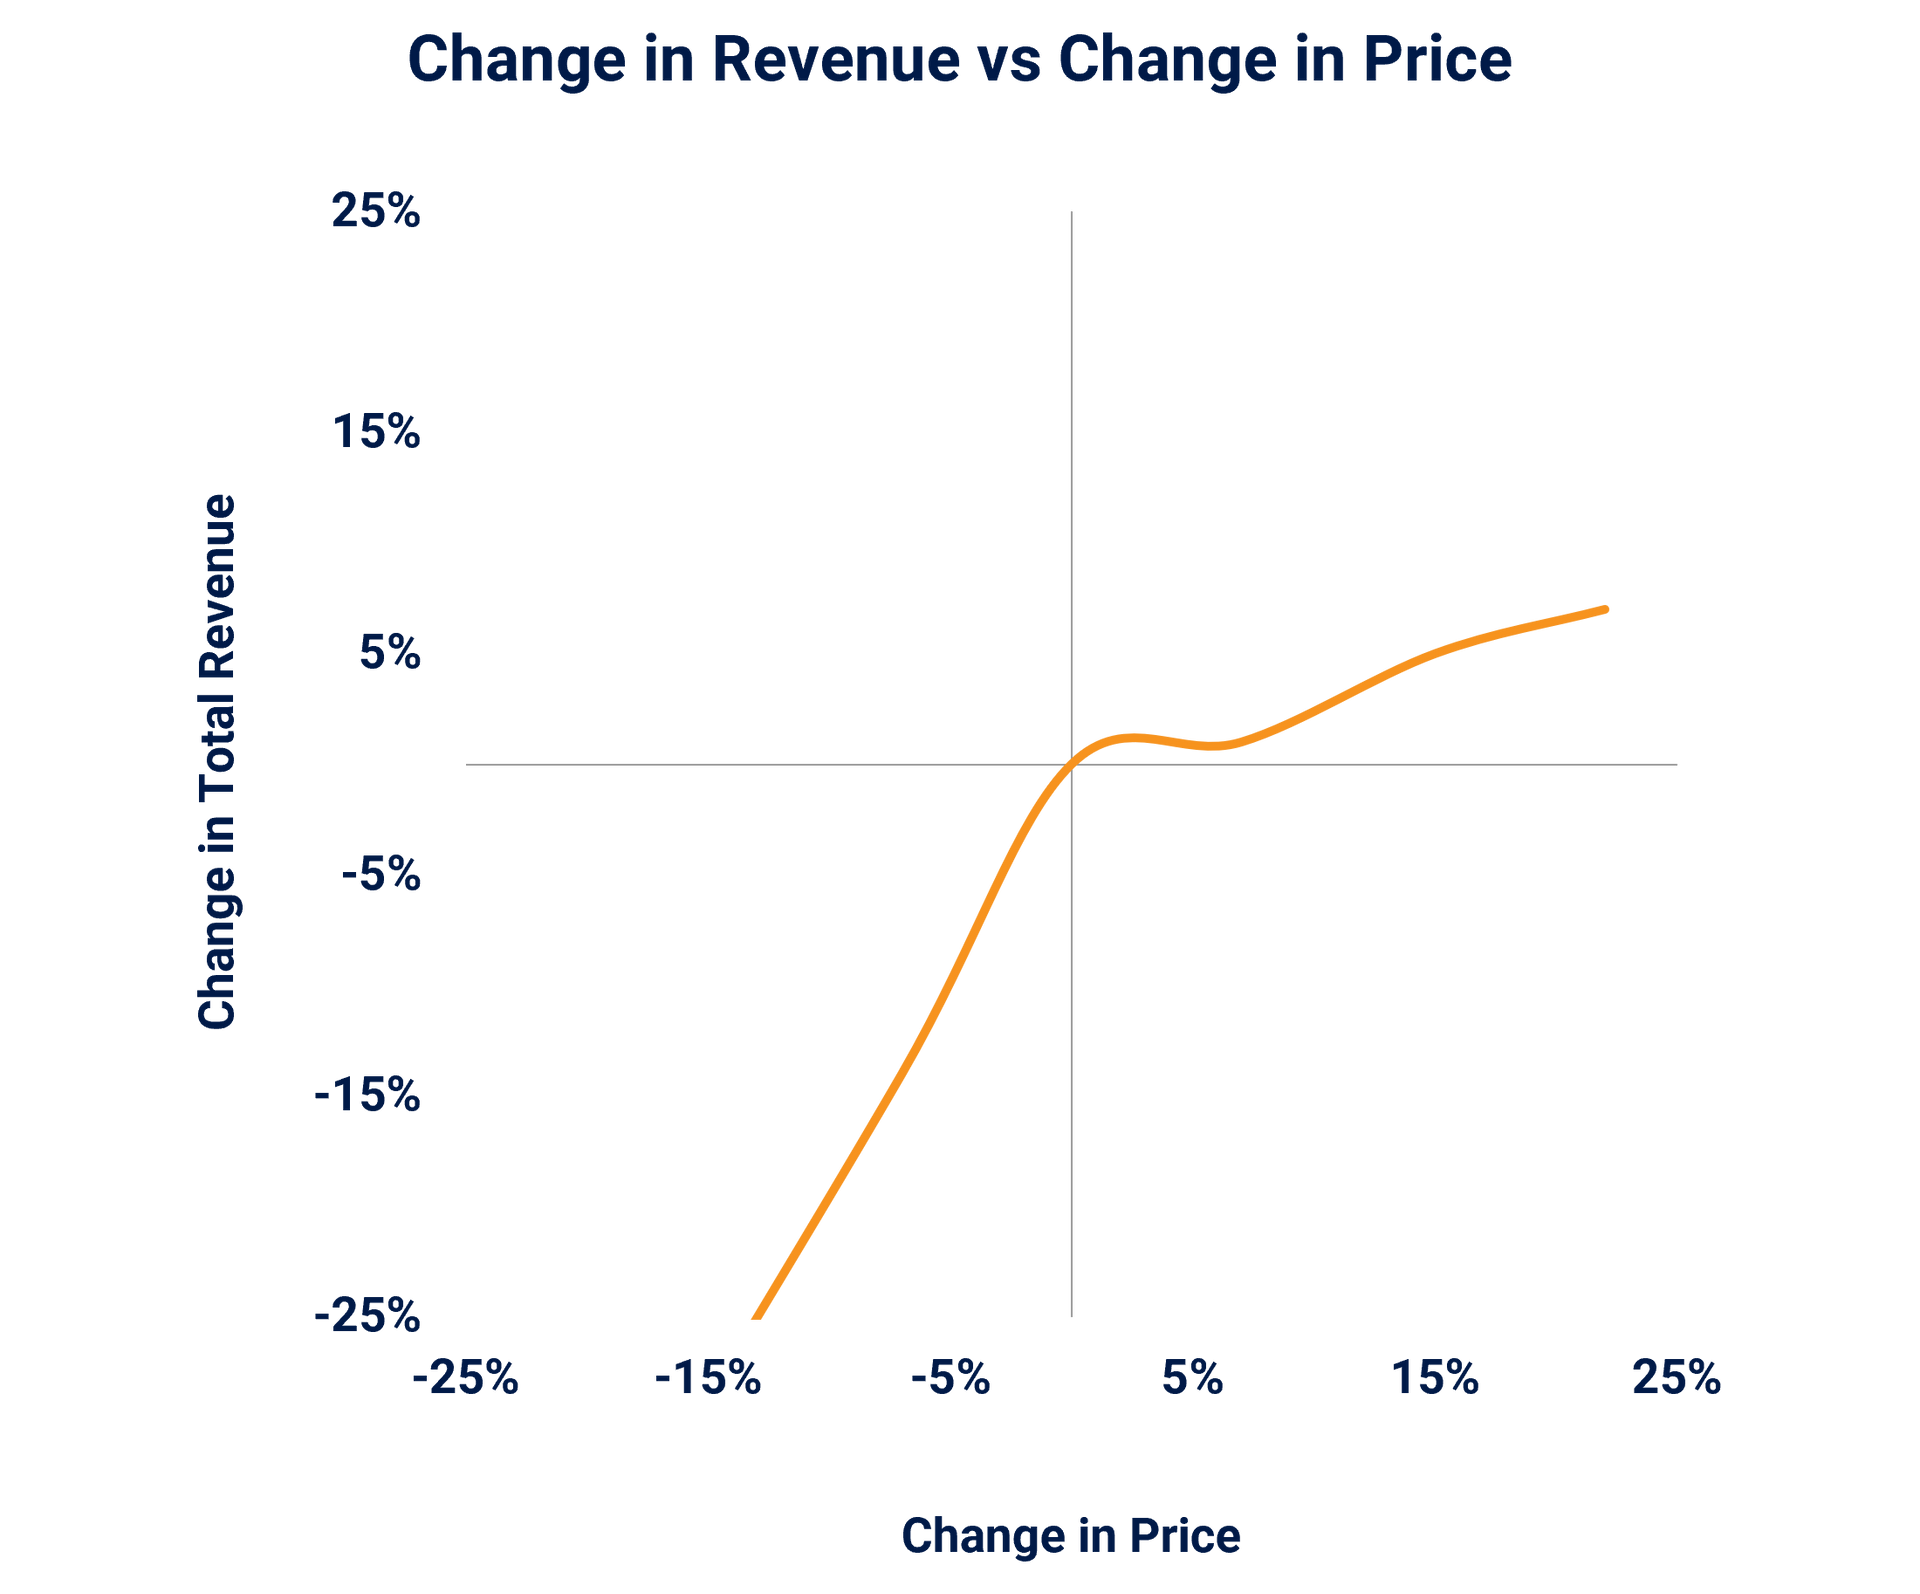 A graph depicting the change in revenue vs the change in price. 